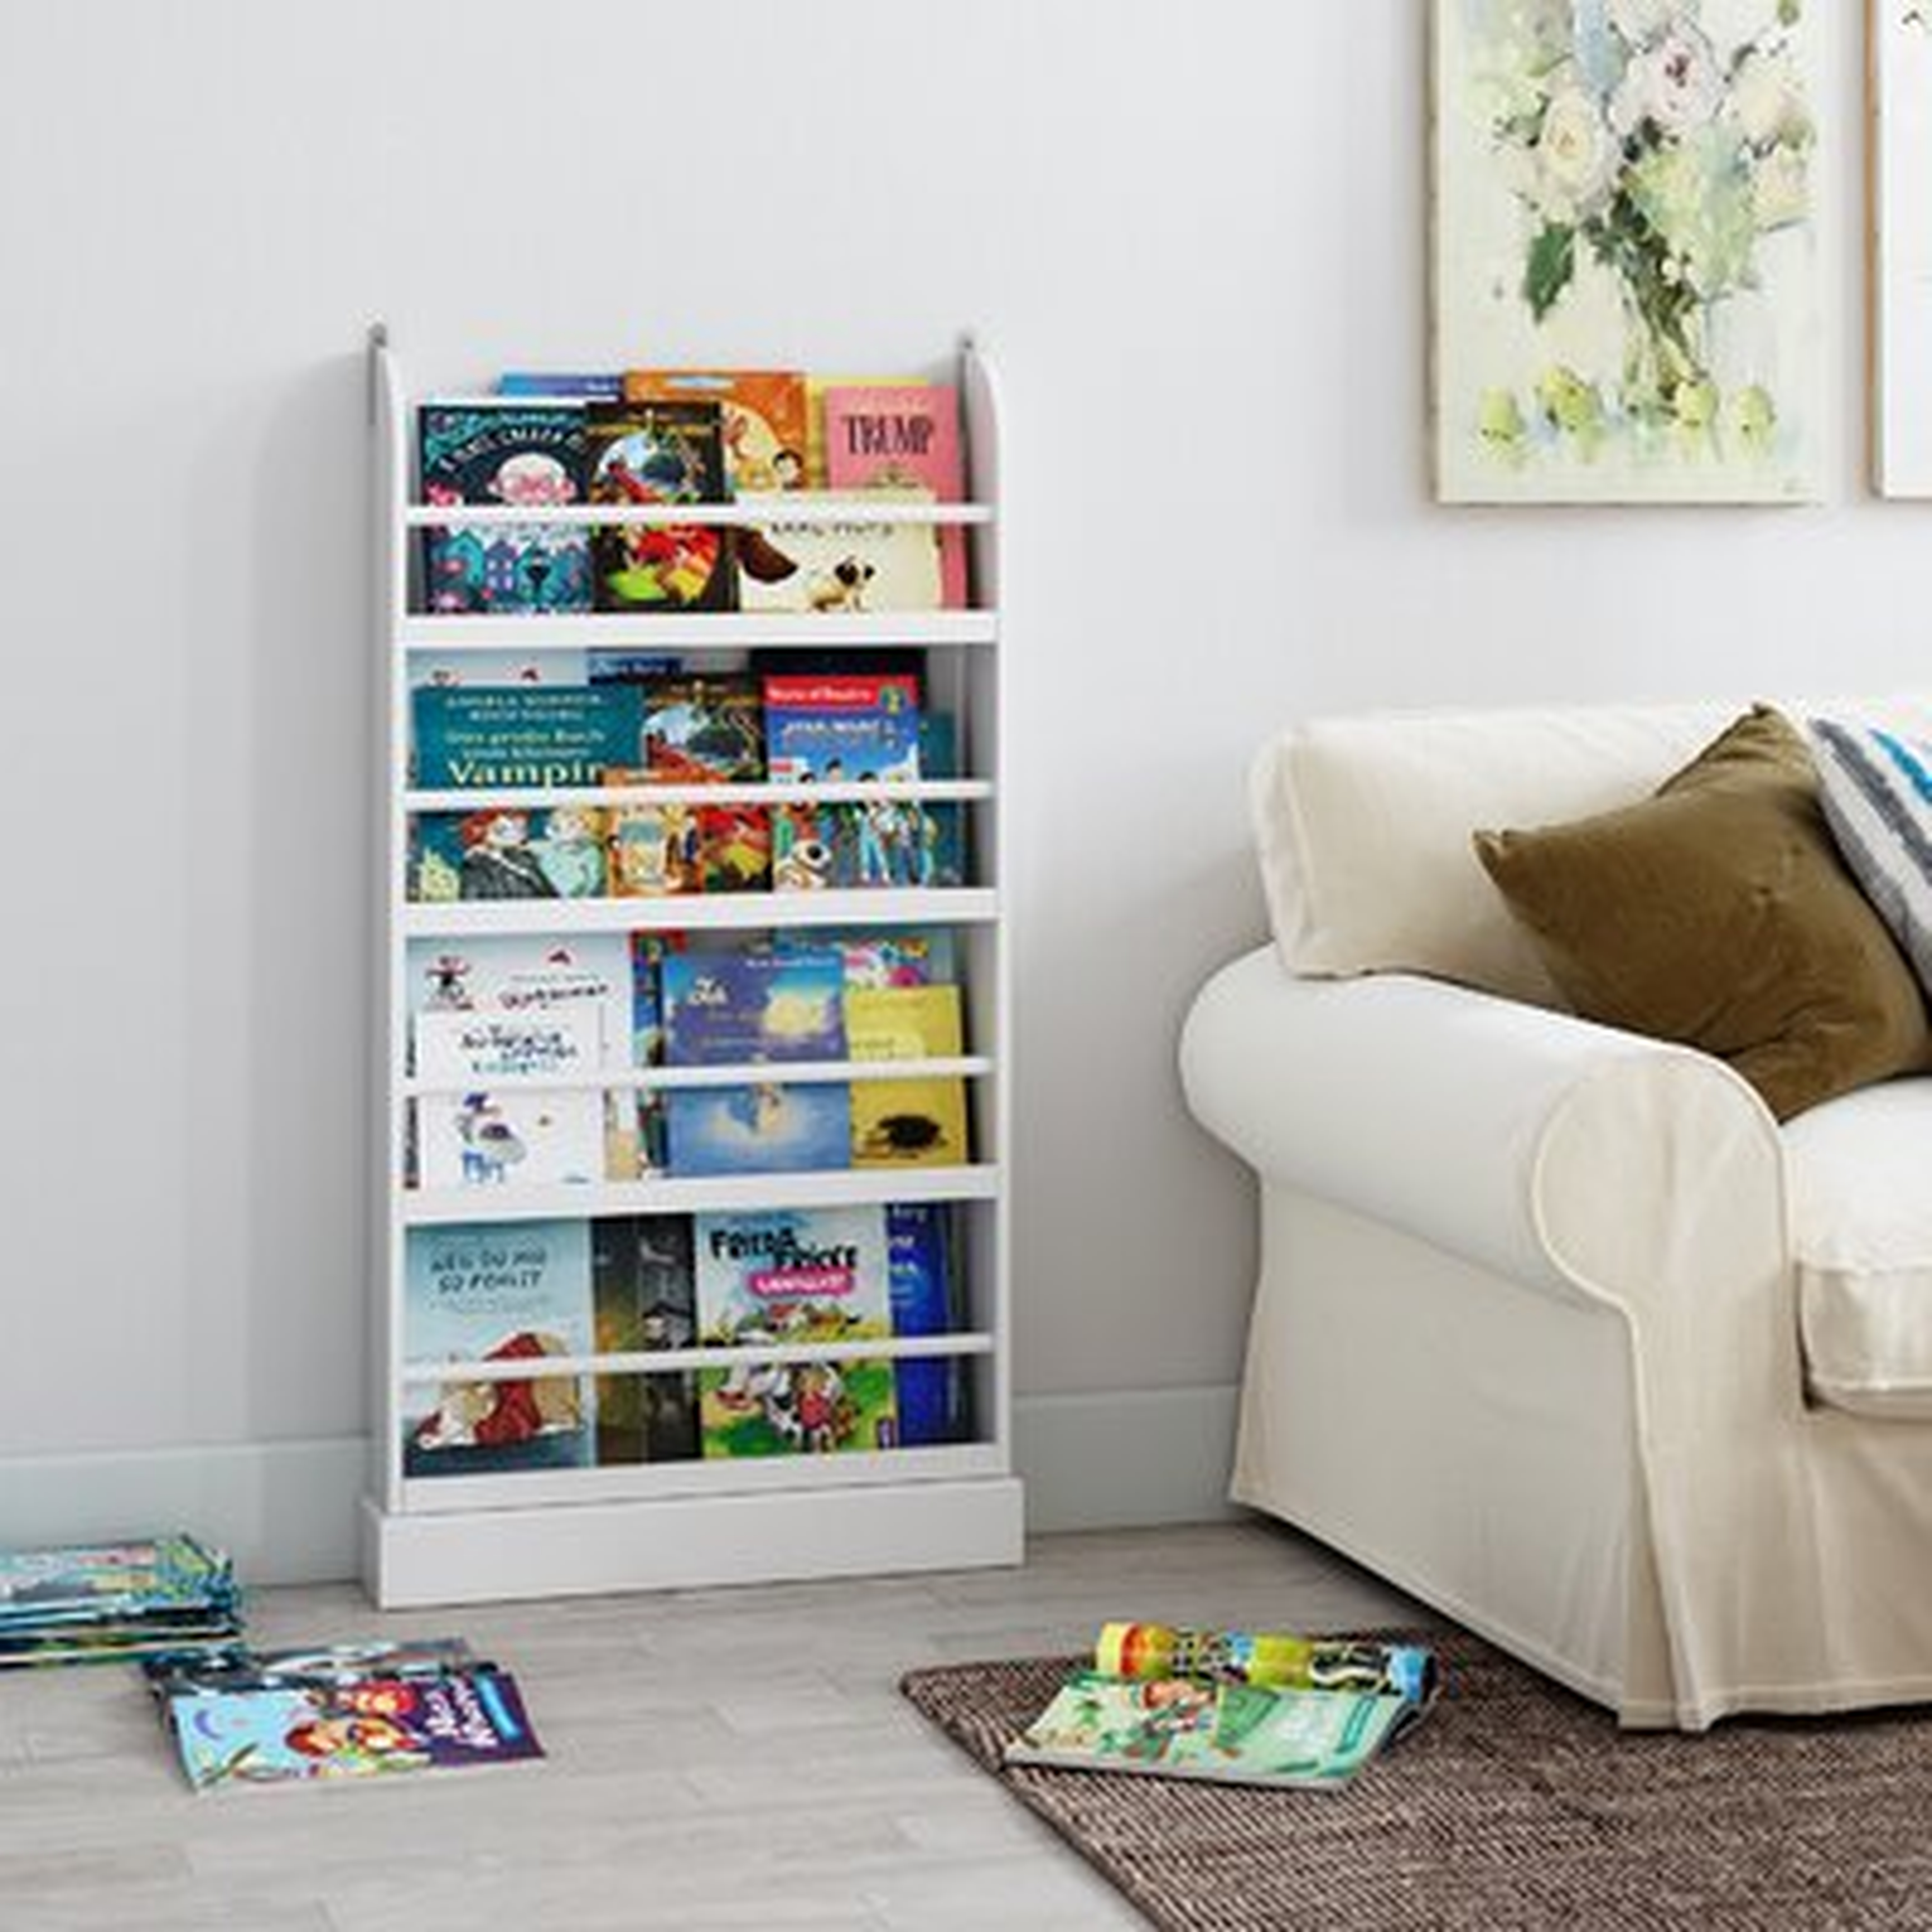 4-Tier Kids Bookshelf, Free Standing Children's Bookcase Rack Against The Wall, 23.62L X 4.7"W X 42.7"H Organizer Holder Stand For Books Toys In Study Living Room Bedroom, White" - Wayfair